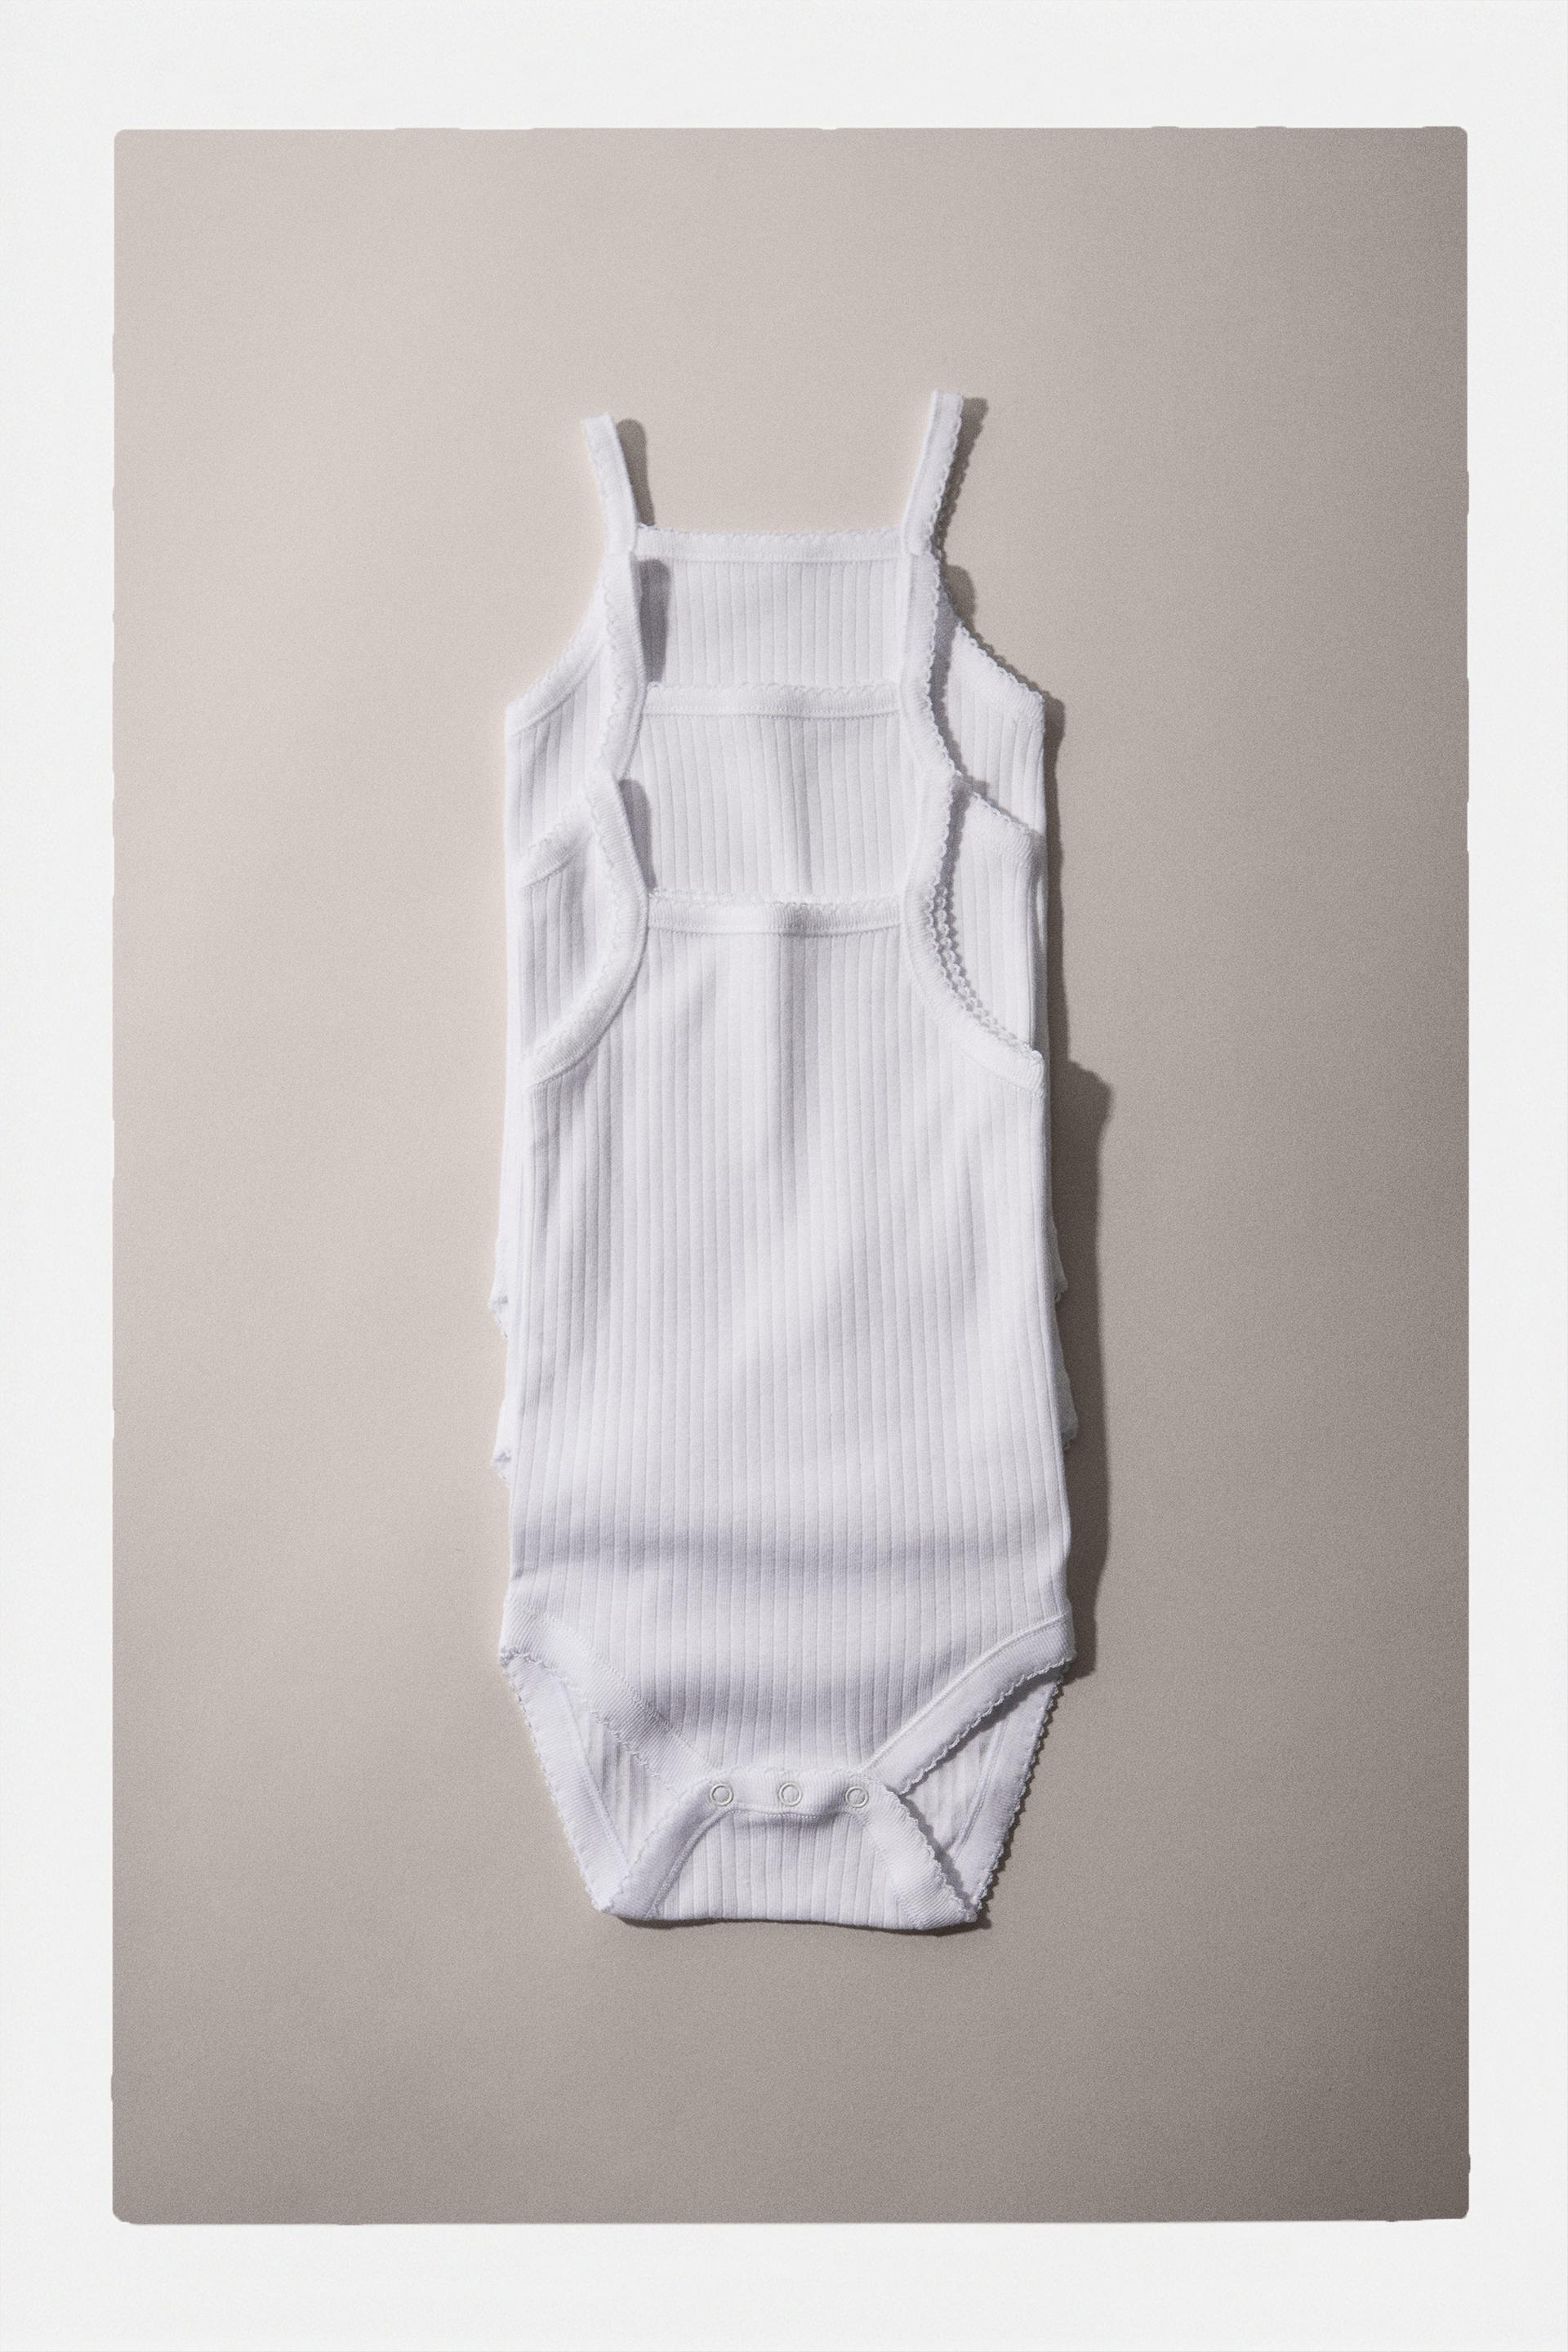 Zara Bodysuits & Baby Grows on sale - Outlet